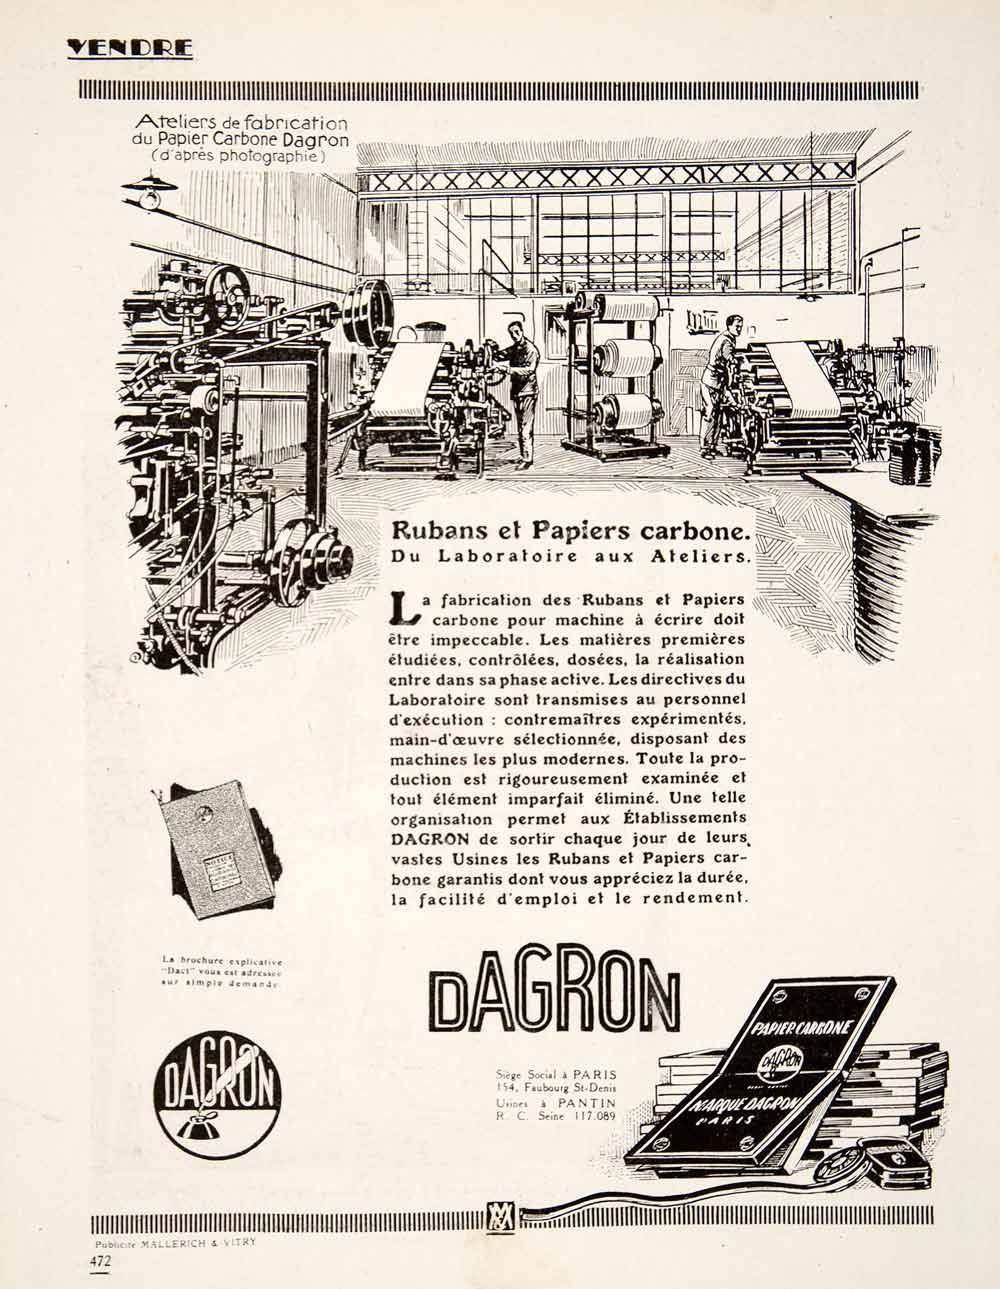 1924 Ad Dagron 154 Faubourg St-Denis Carbon Paper Typewriter Ribbons VEN3